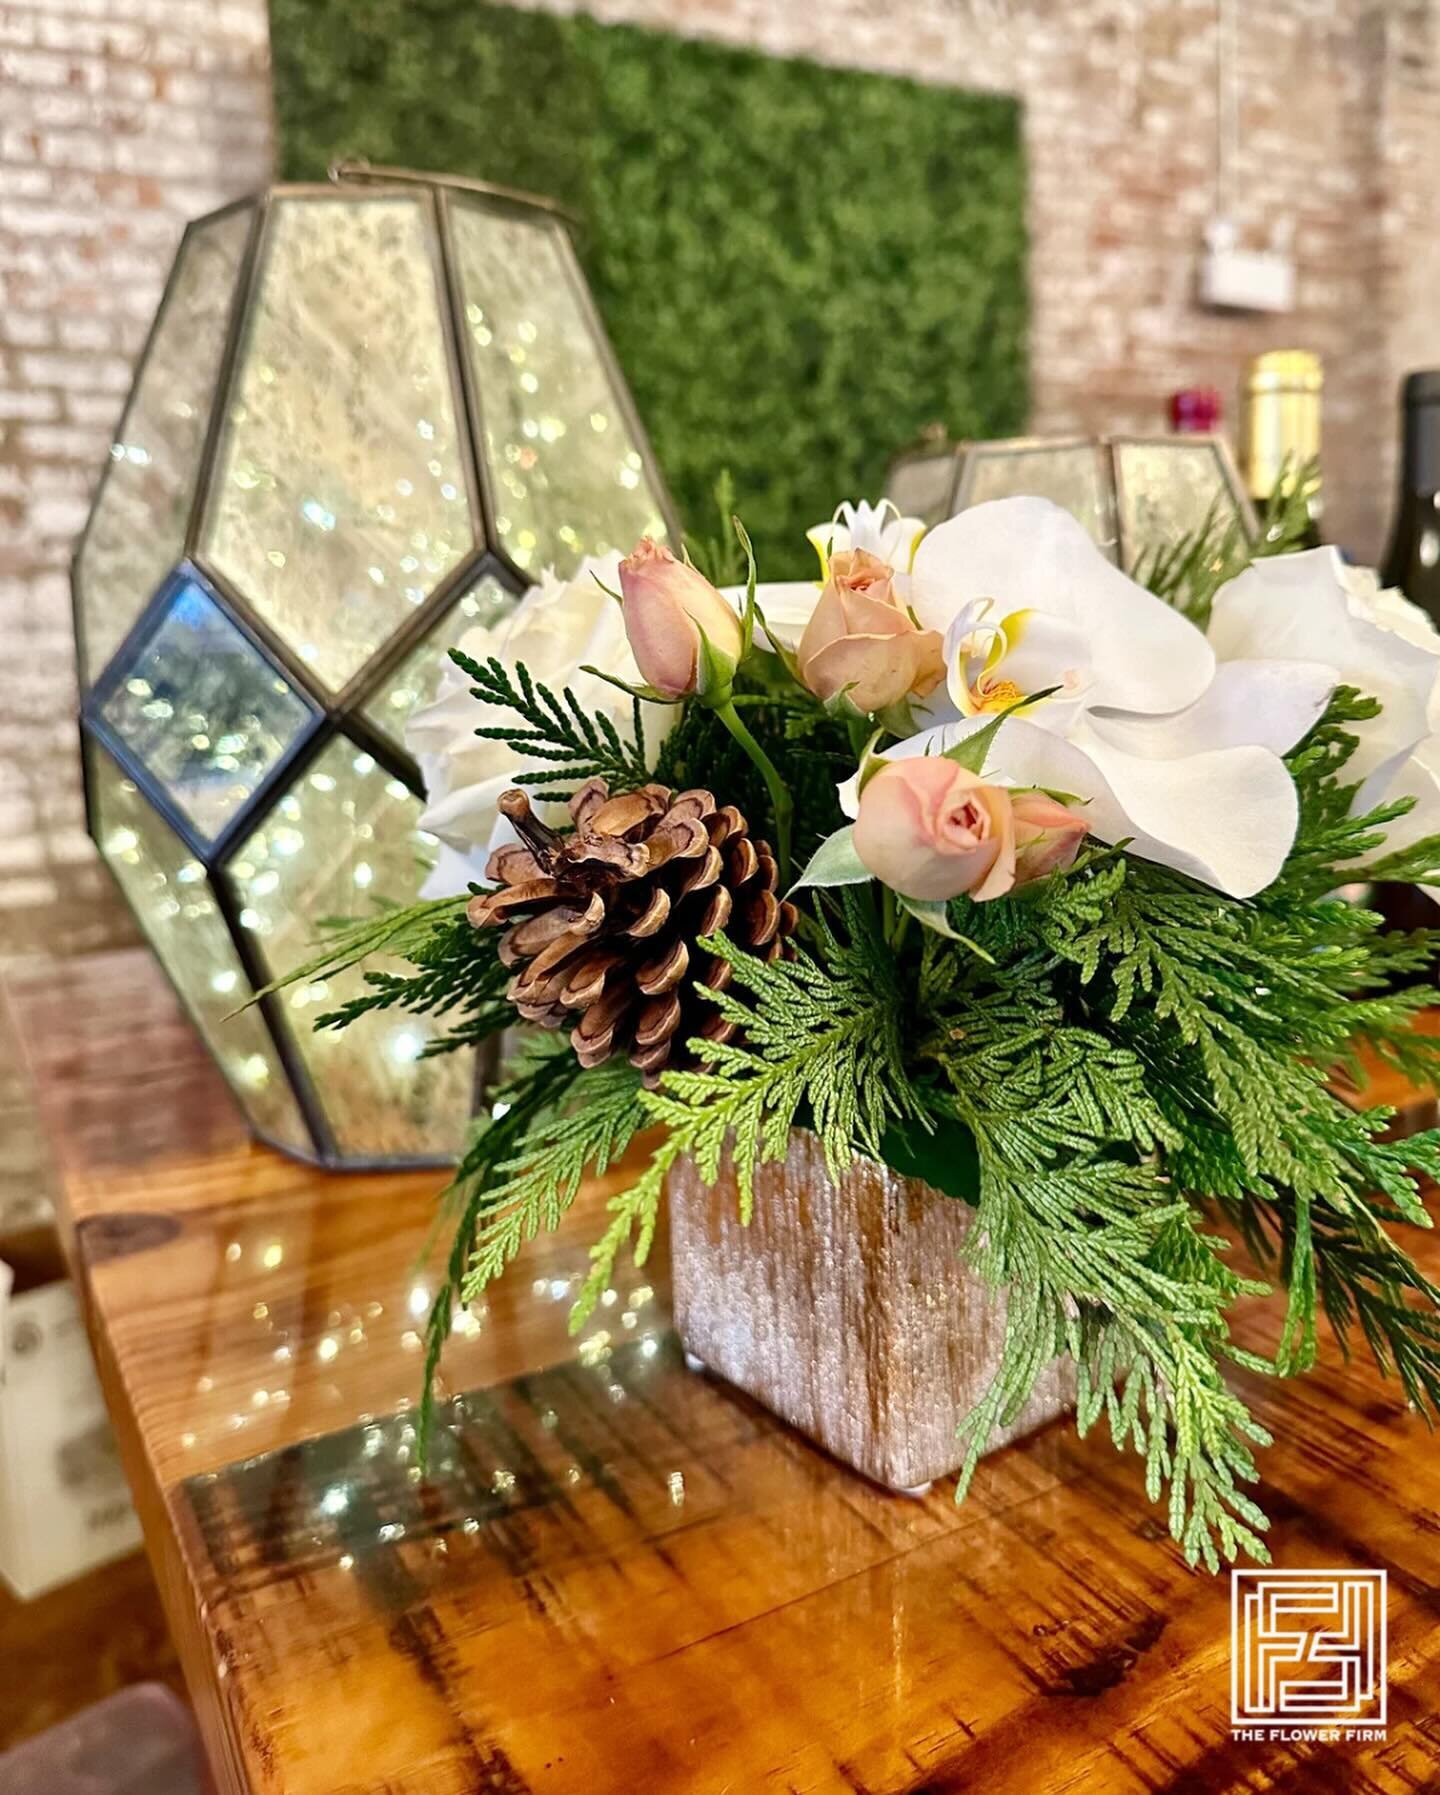 Merry &amp; bright at The Carter ✨
So great working with our neighbors for this fabulous event! 
.
#flowerfirm #chicagoevents #chicagoflorist #chicagofloraldesign #event #eventdesign #celebration #holidaydecor #eventplanning #eventdecor